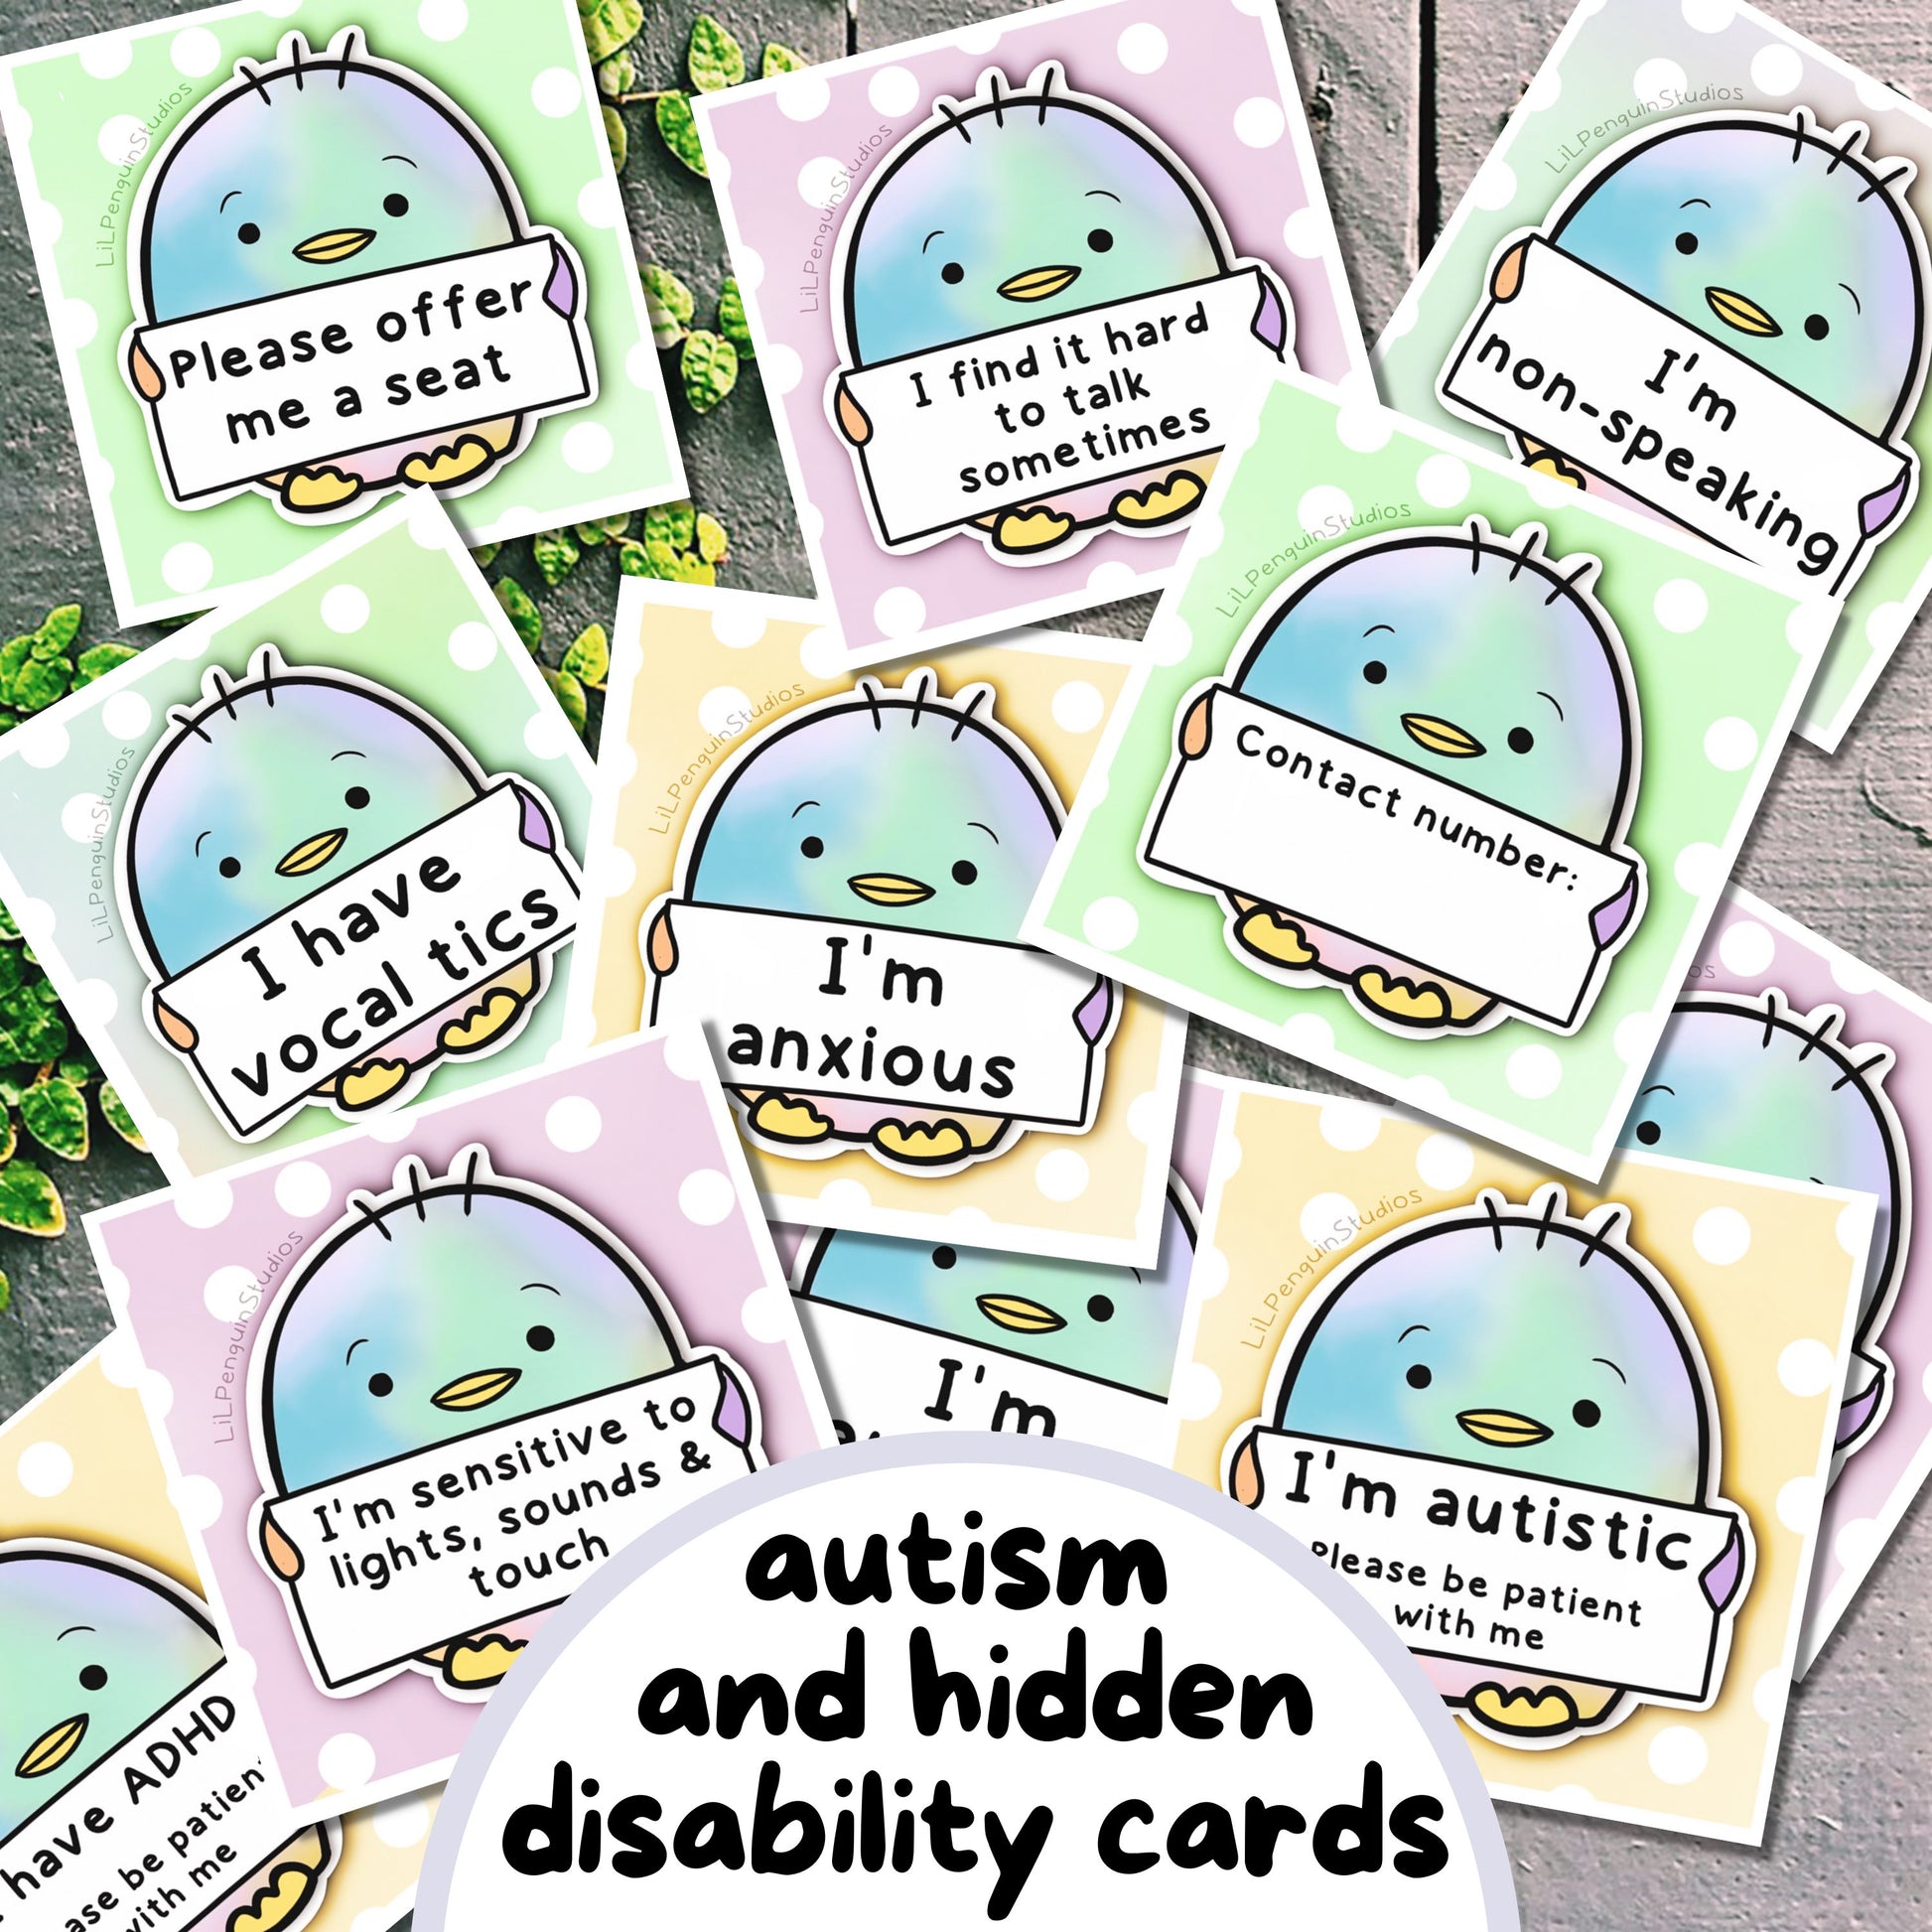 Hand-drawn communication cards: autism and hidden disability cards (autism, adhd, anxiety, Tourette, etc.)